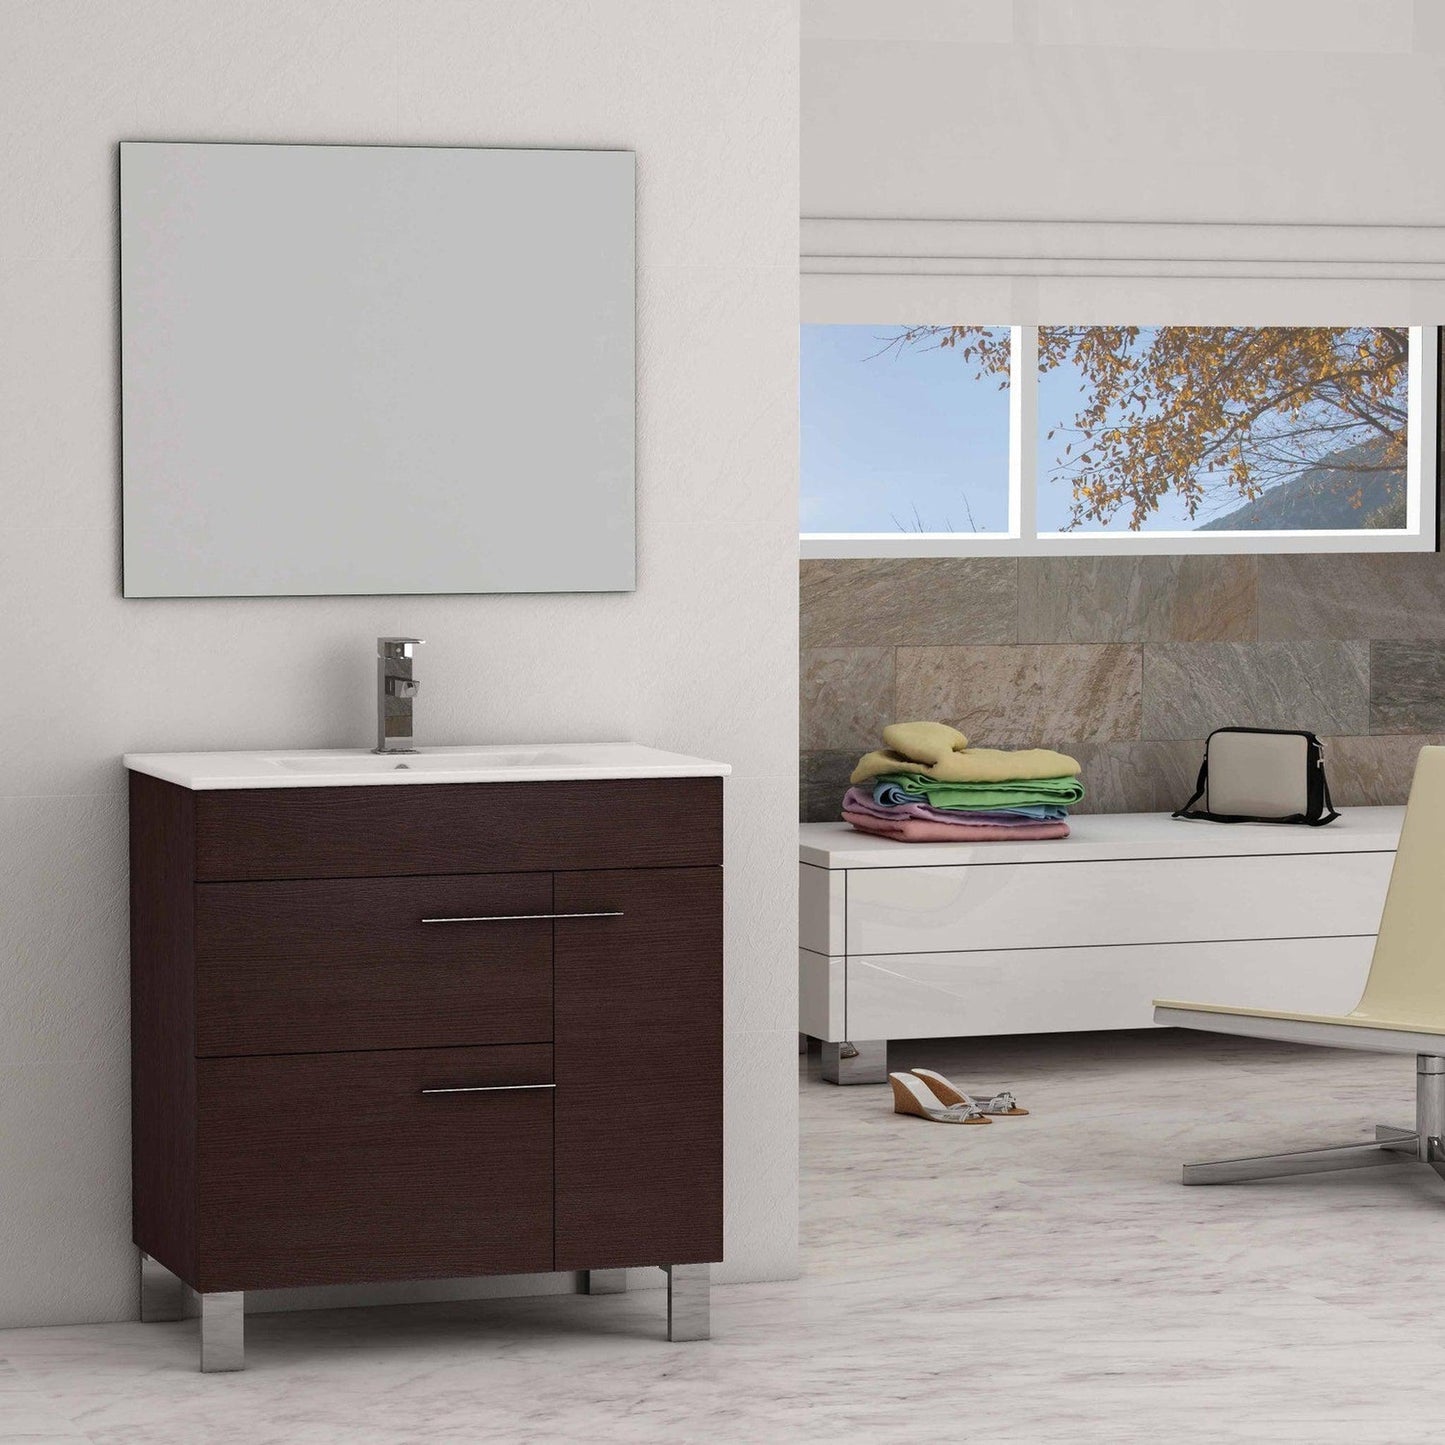 Eviva Cup 24” x 34” Wenge Freestanding Bathroom Vanity With White Integrated Porcelain Sink